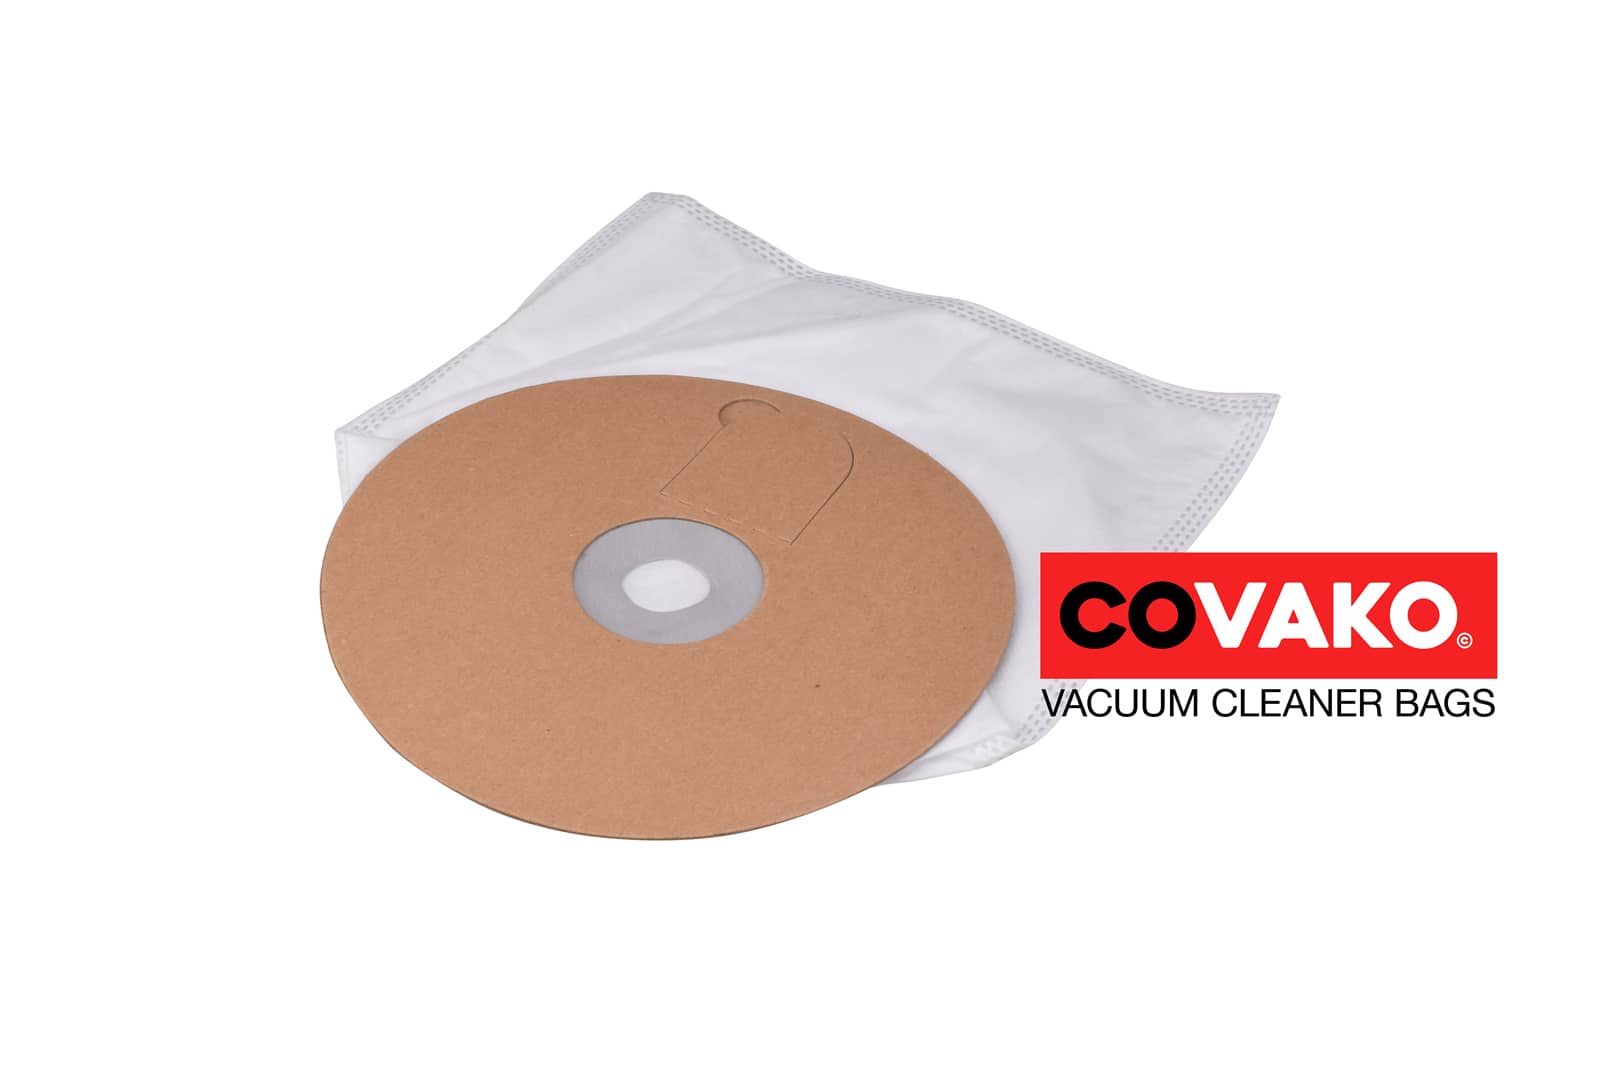 Ivac Ruck Zuck / Synthesis - Ivac vacuum cleaner bags